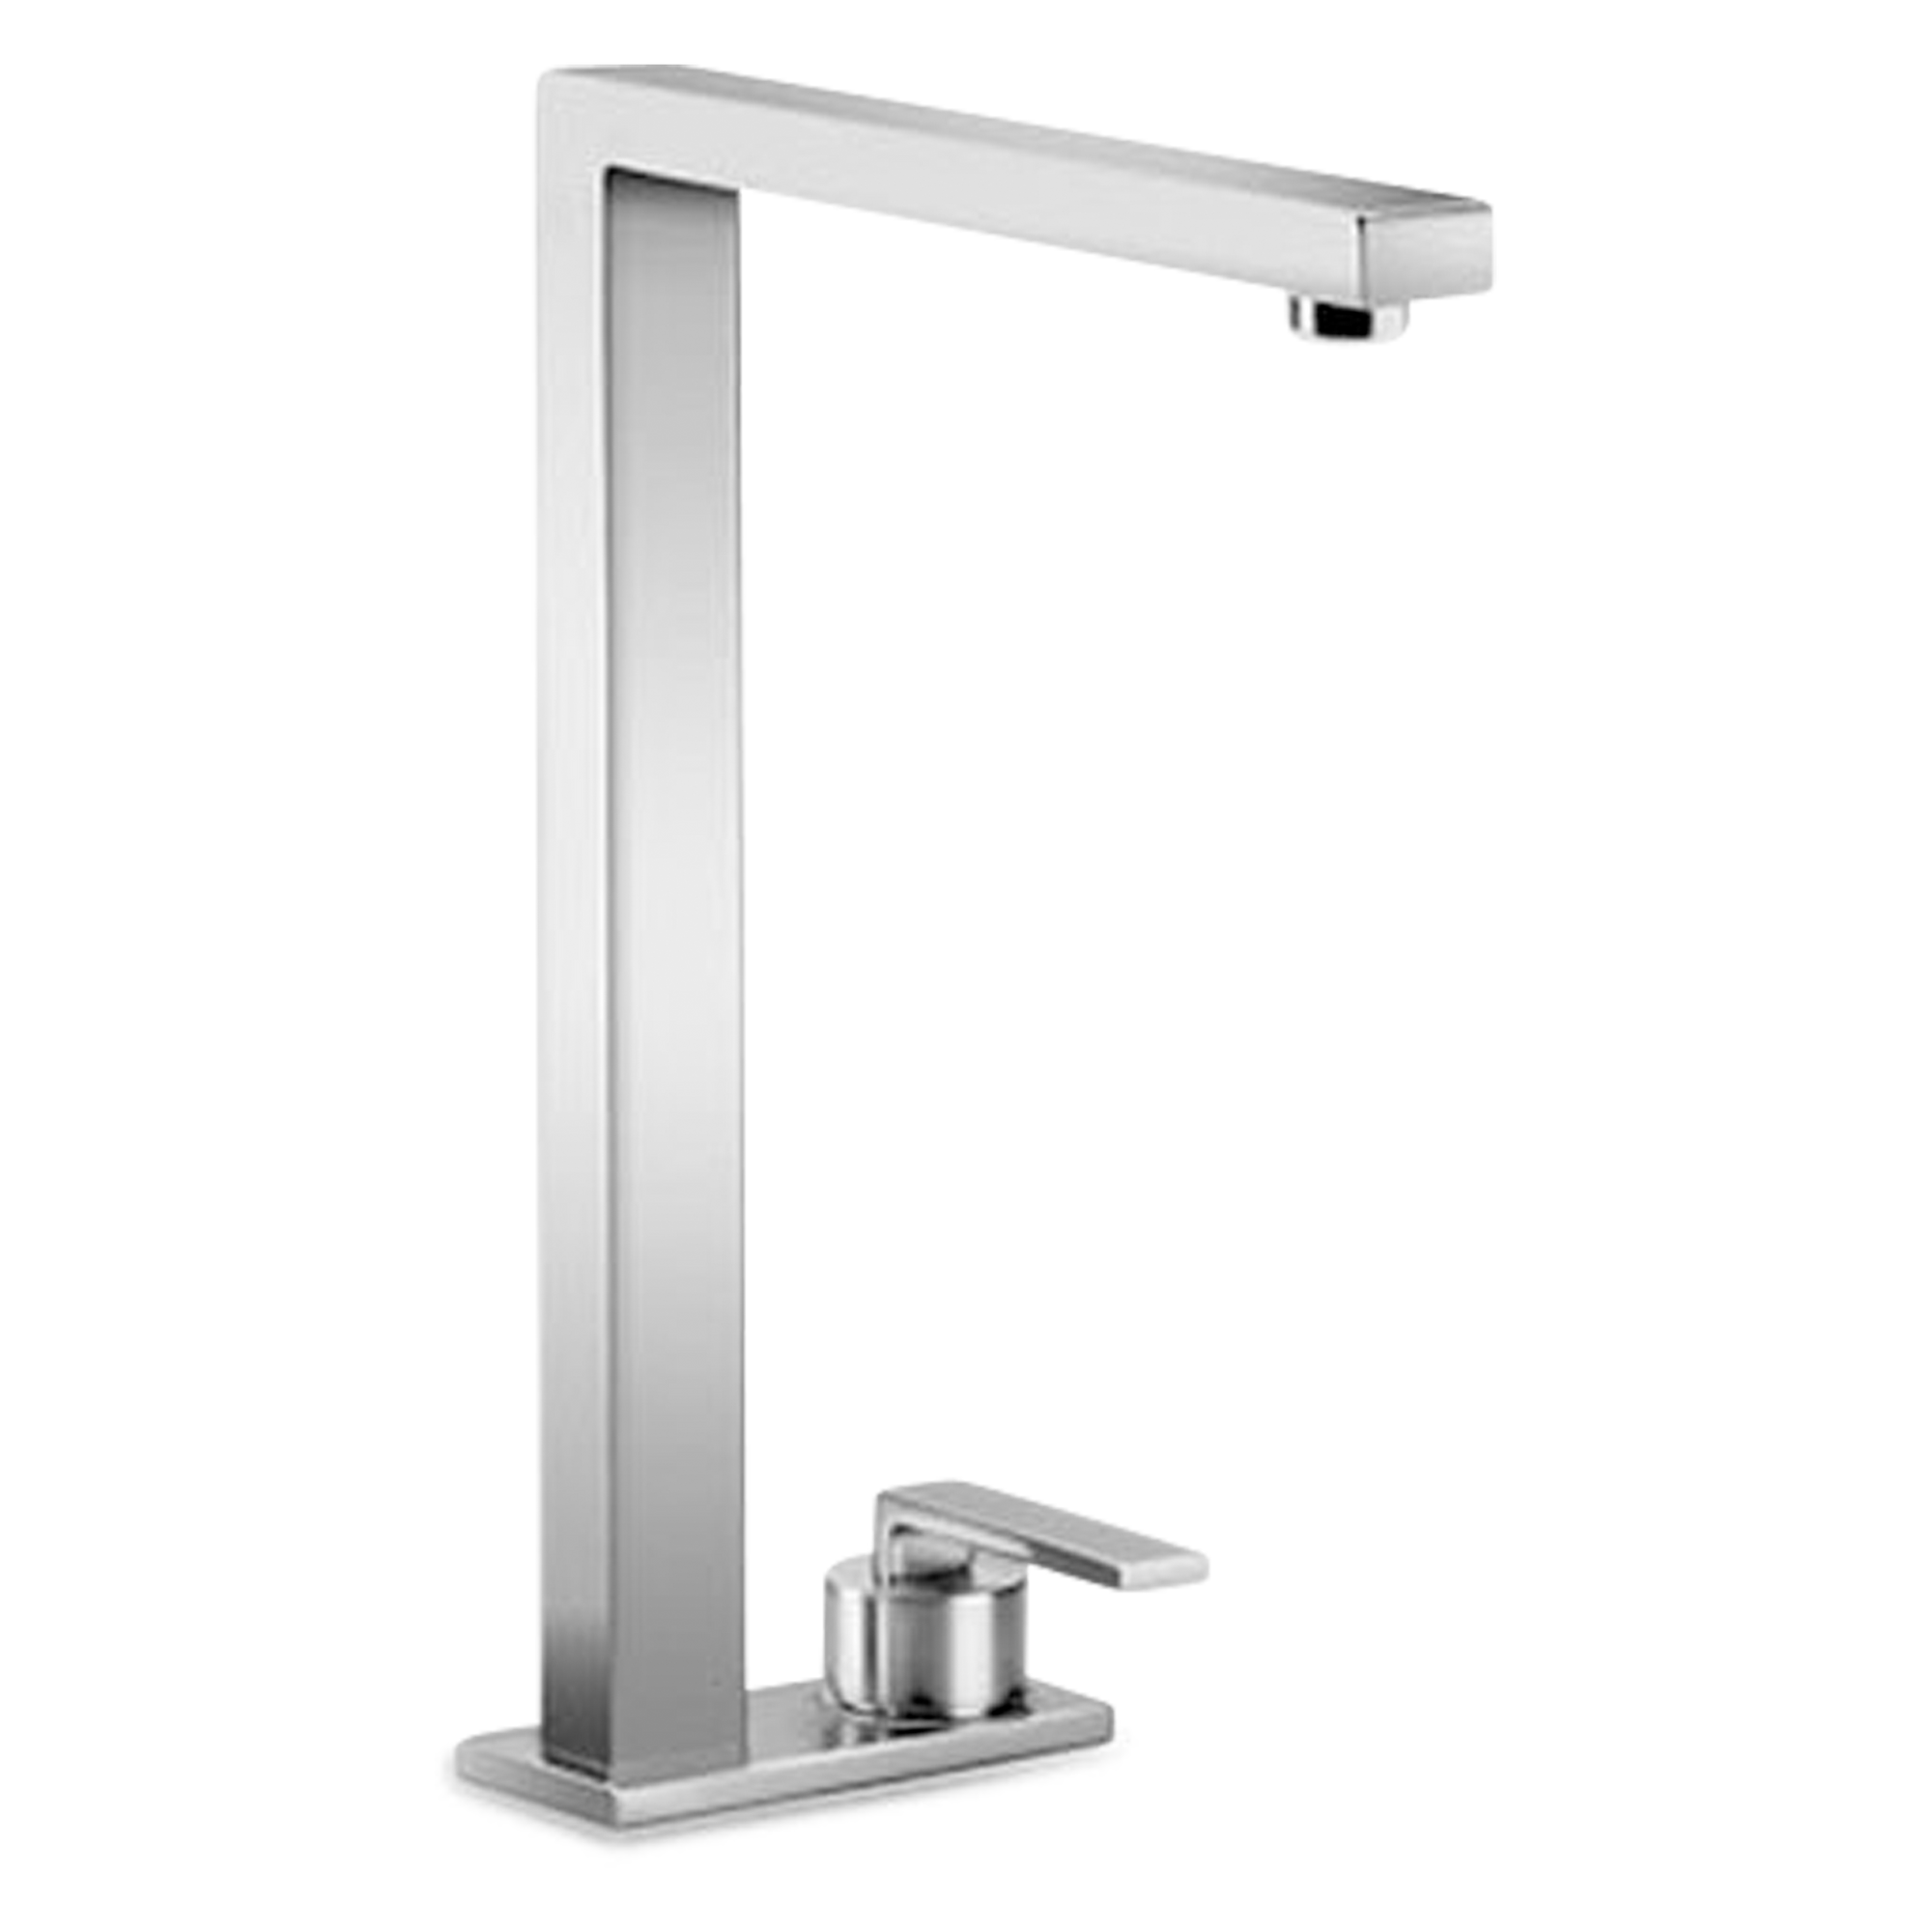 A sleek, modern, two-hole faucet with defined edges and a polished chrome finish.